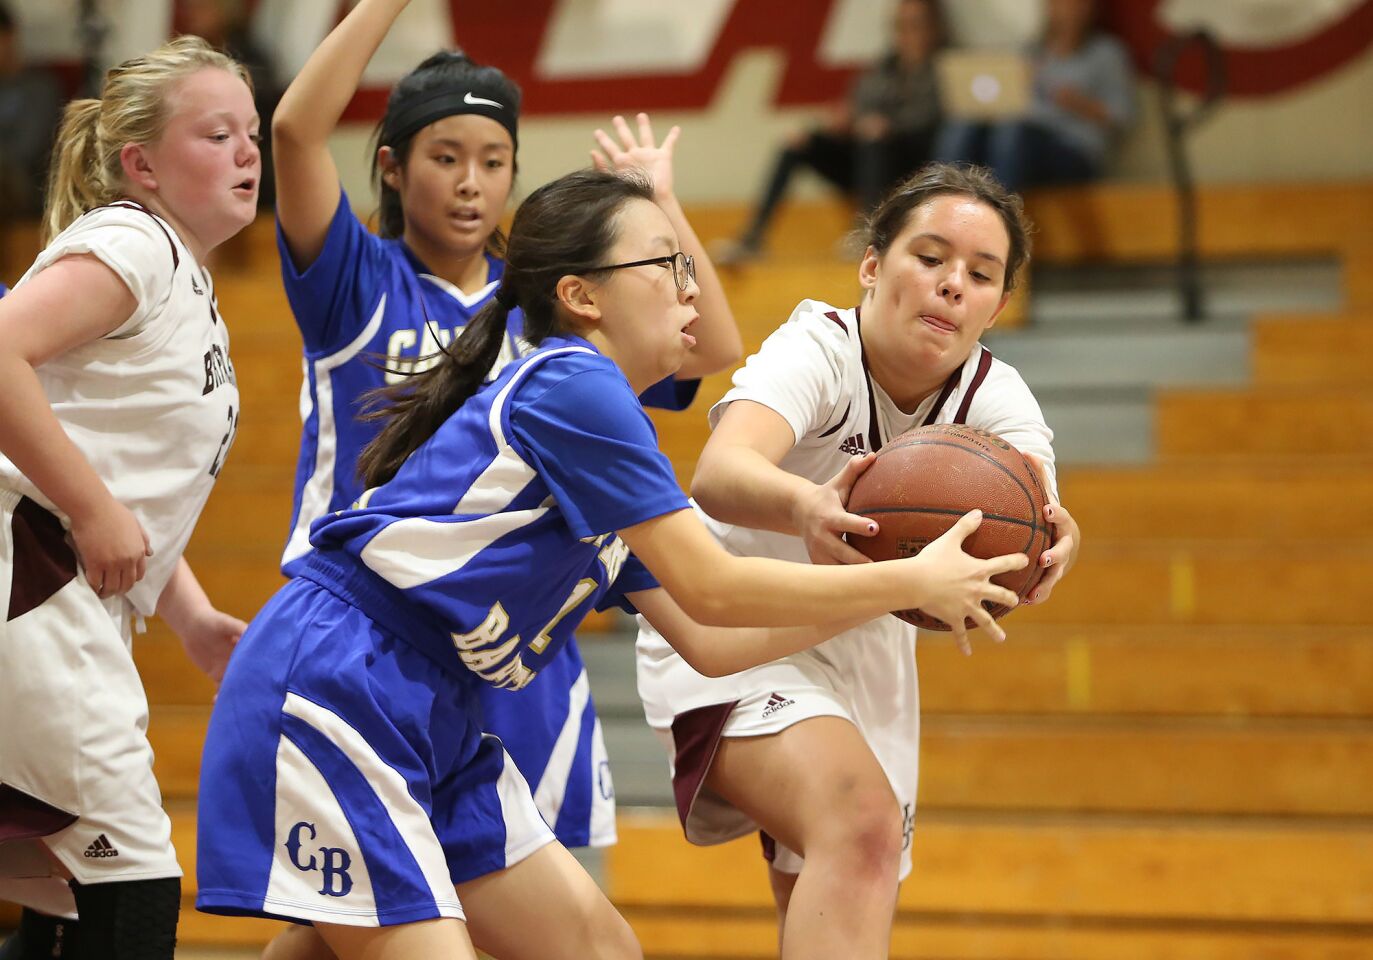 Laguna's Autumn Moreland, far right, takes ball away from La Verne Calvary Baptist player for a steal during girls' basketball on Thursday.